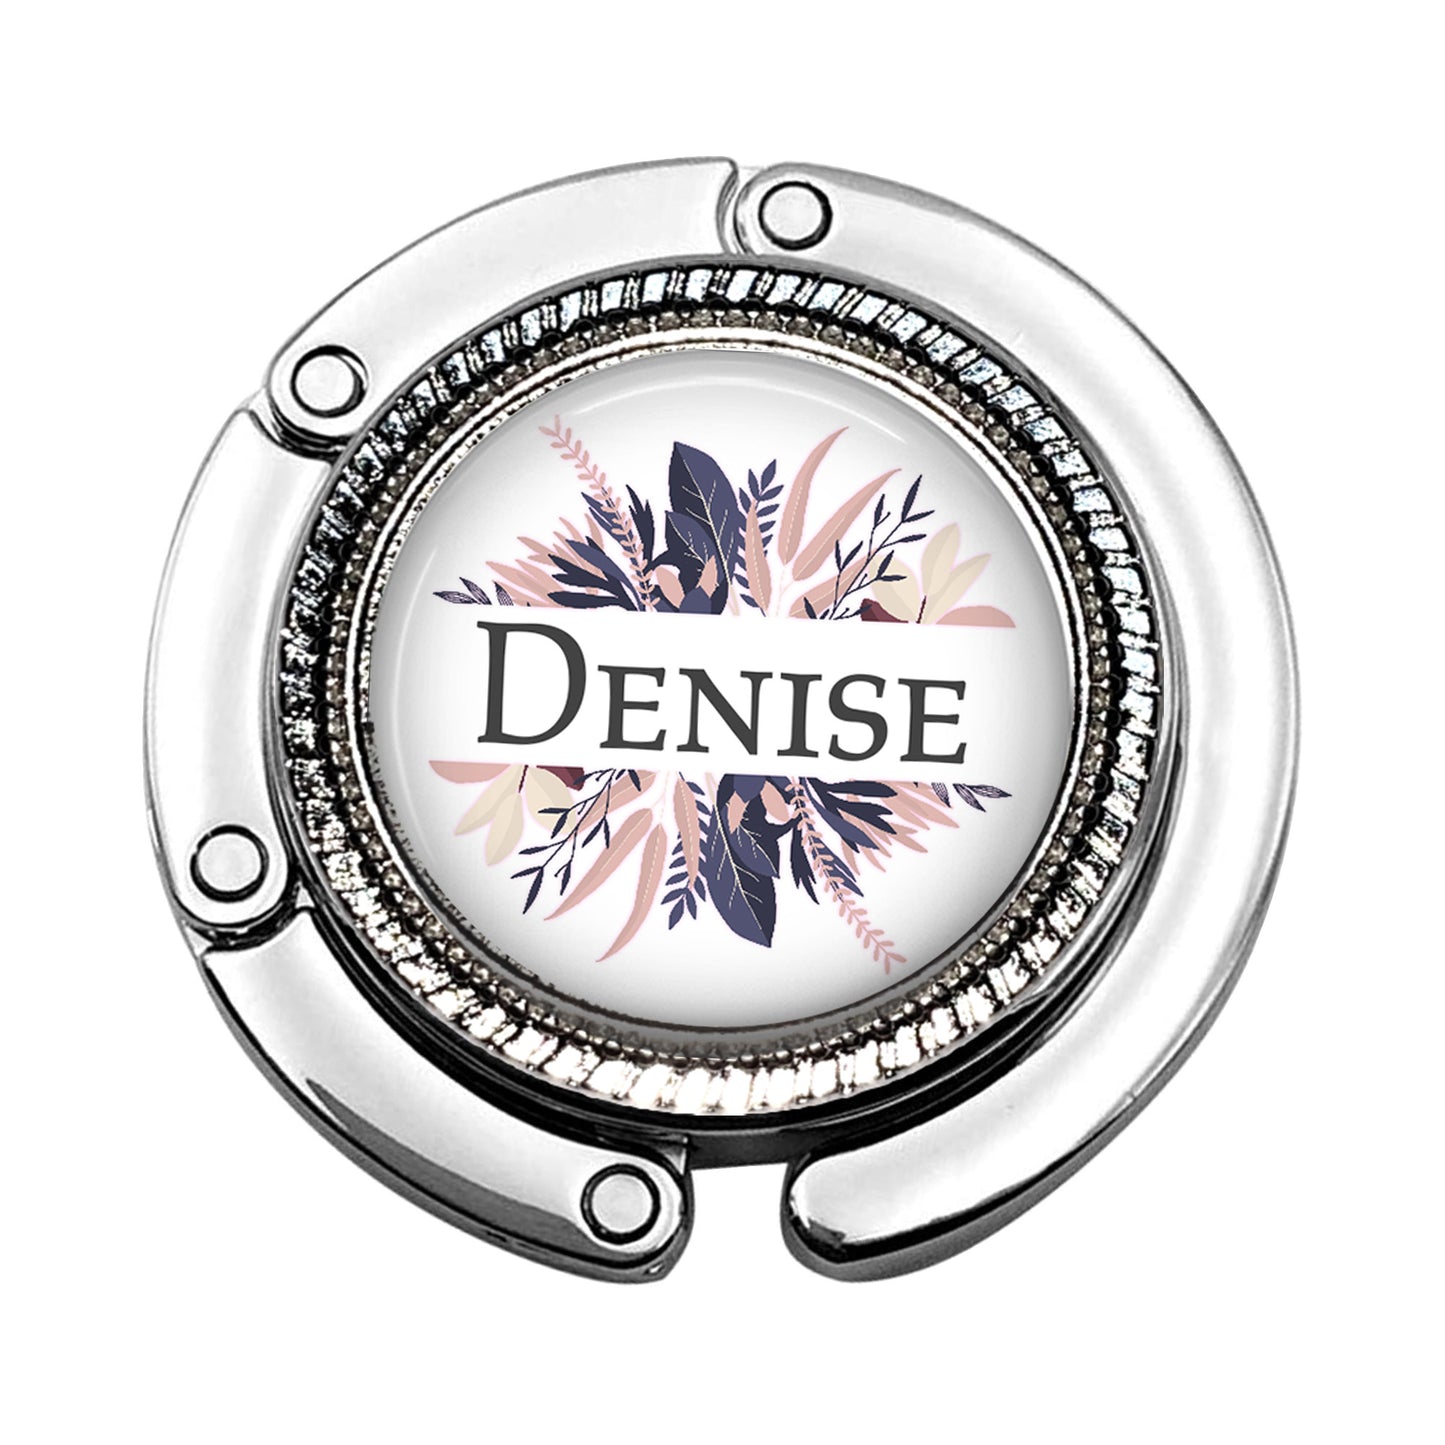 a badge with the name denise on it